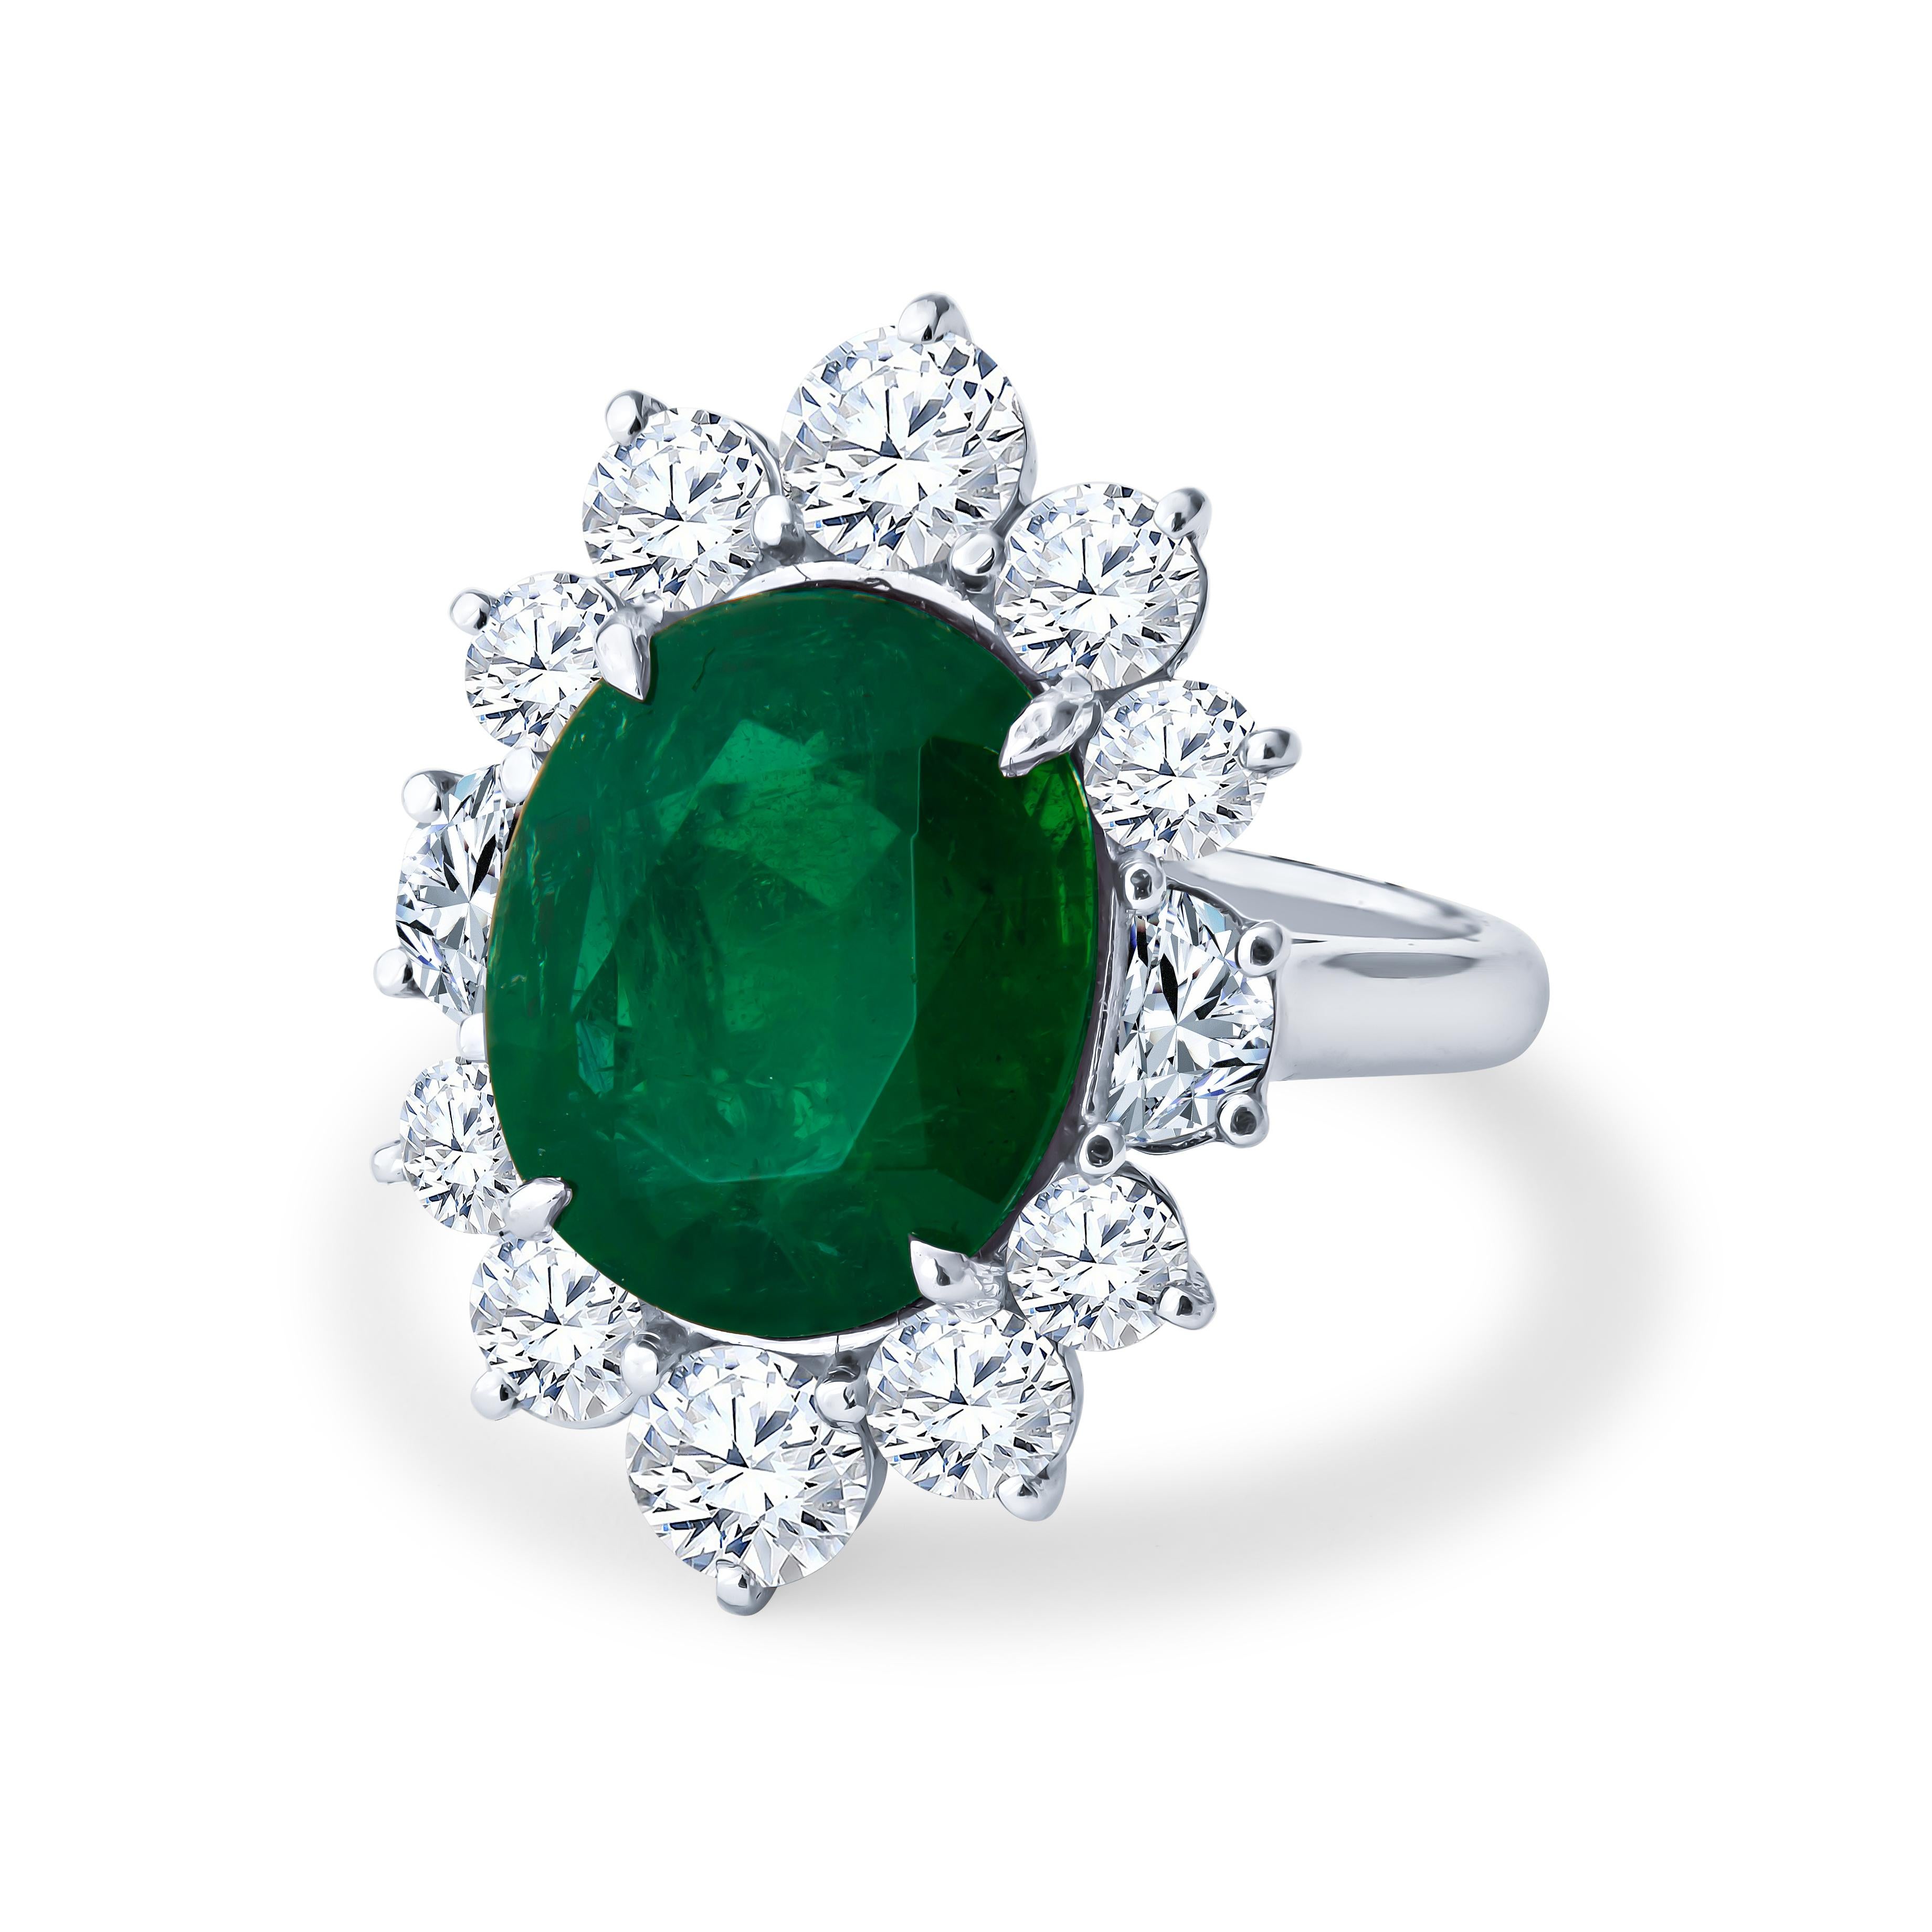 This exquisite colored stone piece features a 8.44ct oval cut emerald, surrounded by a halo of 3.35ct total weight in 10 round cut diamonds and 2 half-moon step cut diamonds, creating a floral design. The emerald center stone is a rich bright green